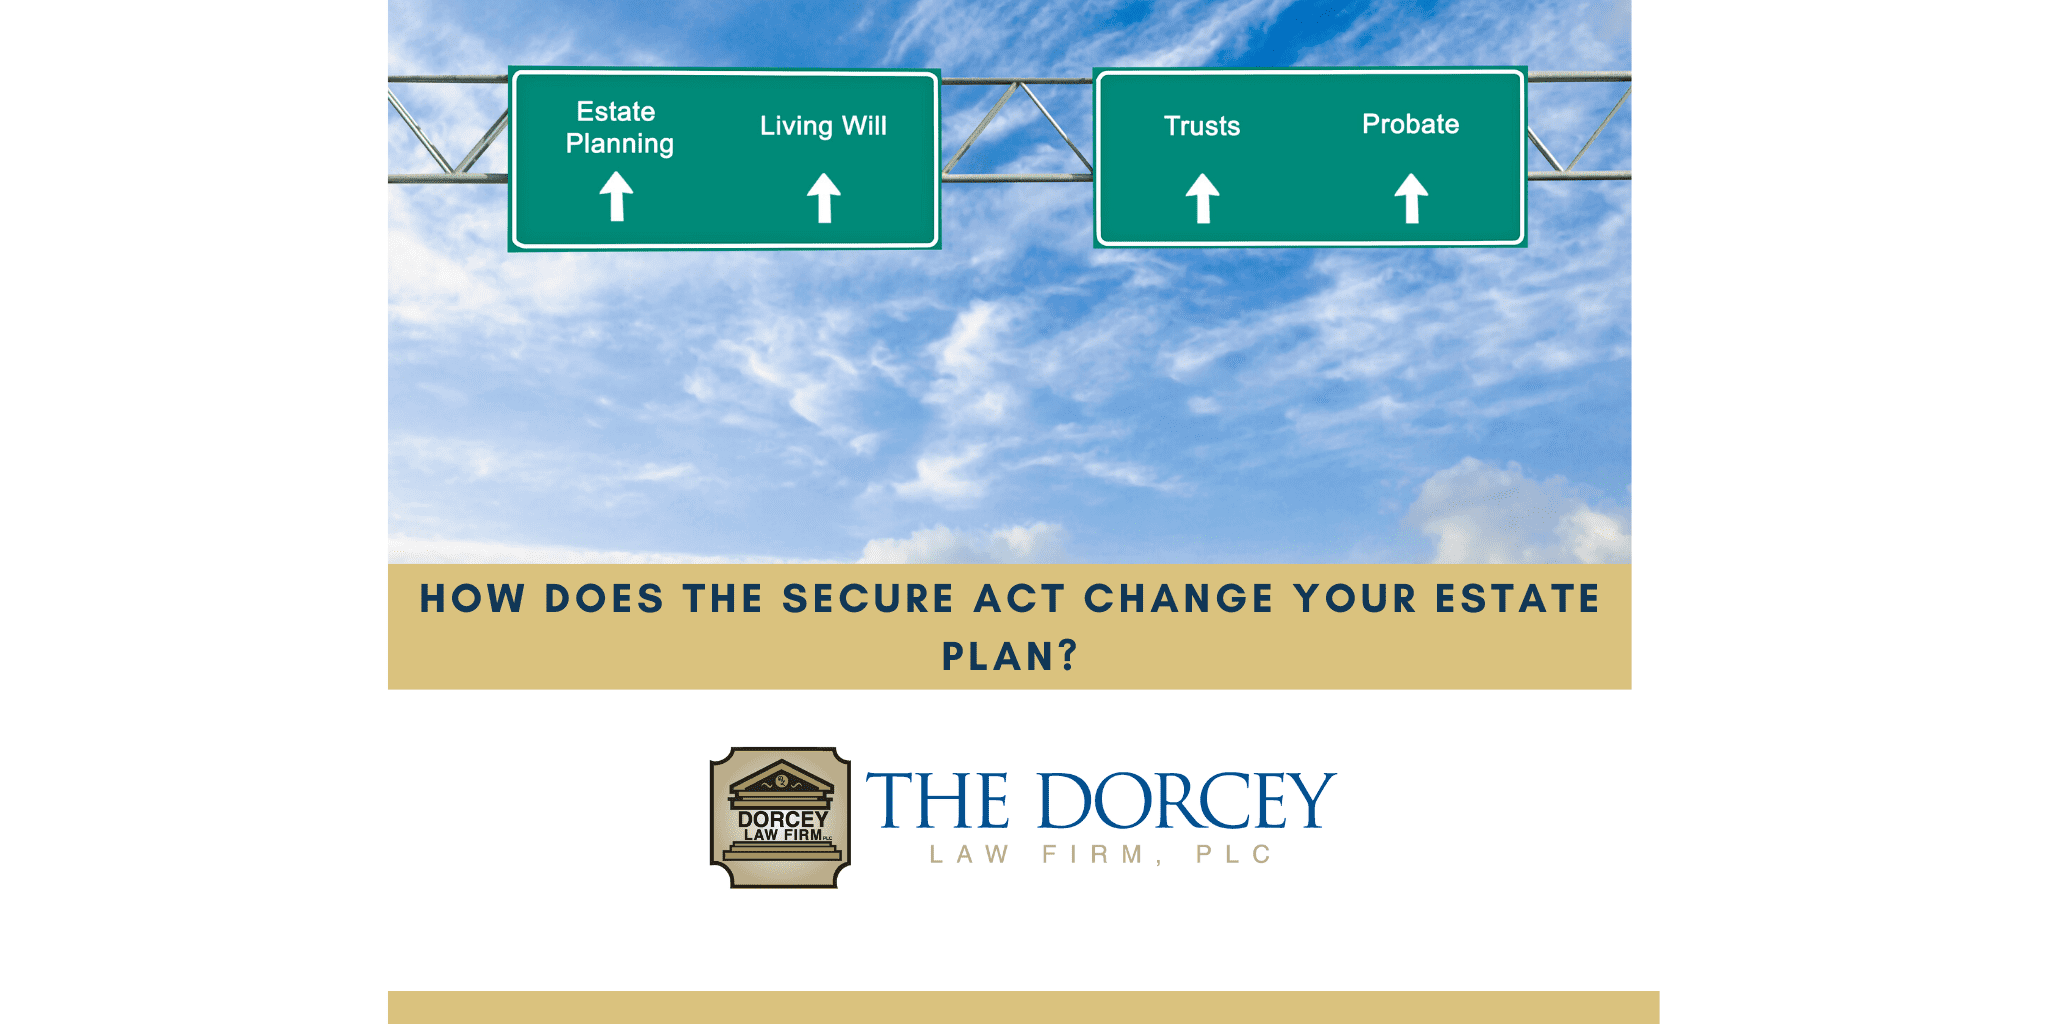 How Does the Secure Act Change Your Estate Plan?